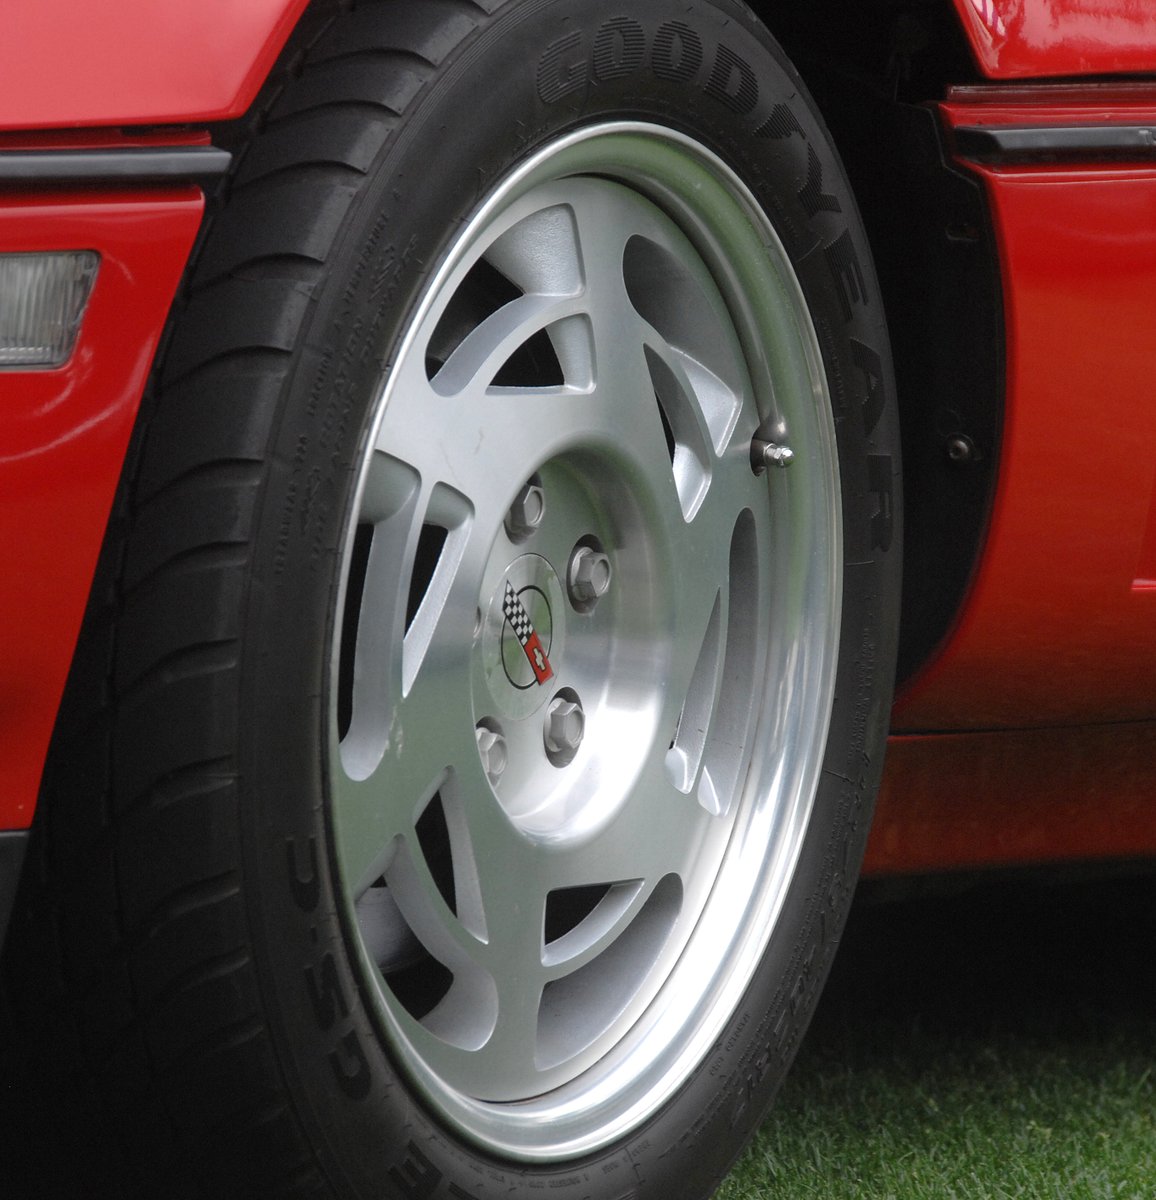 #WheelWednesday is simply beautiful with this 1989 #CorvettePassion #Corvette